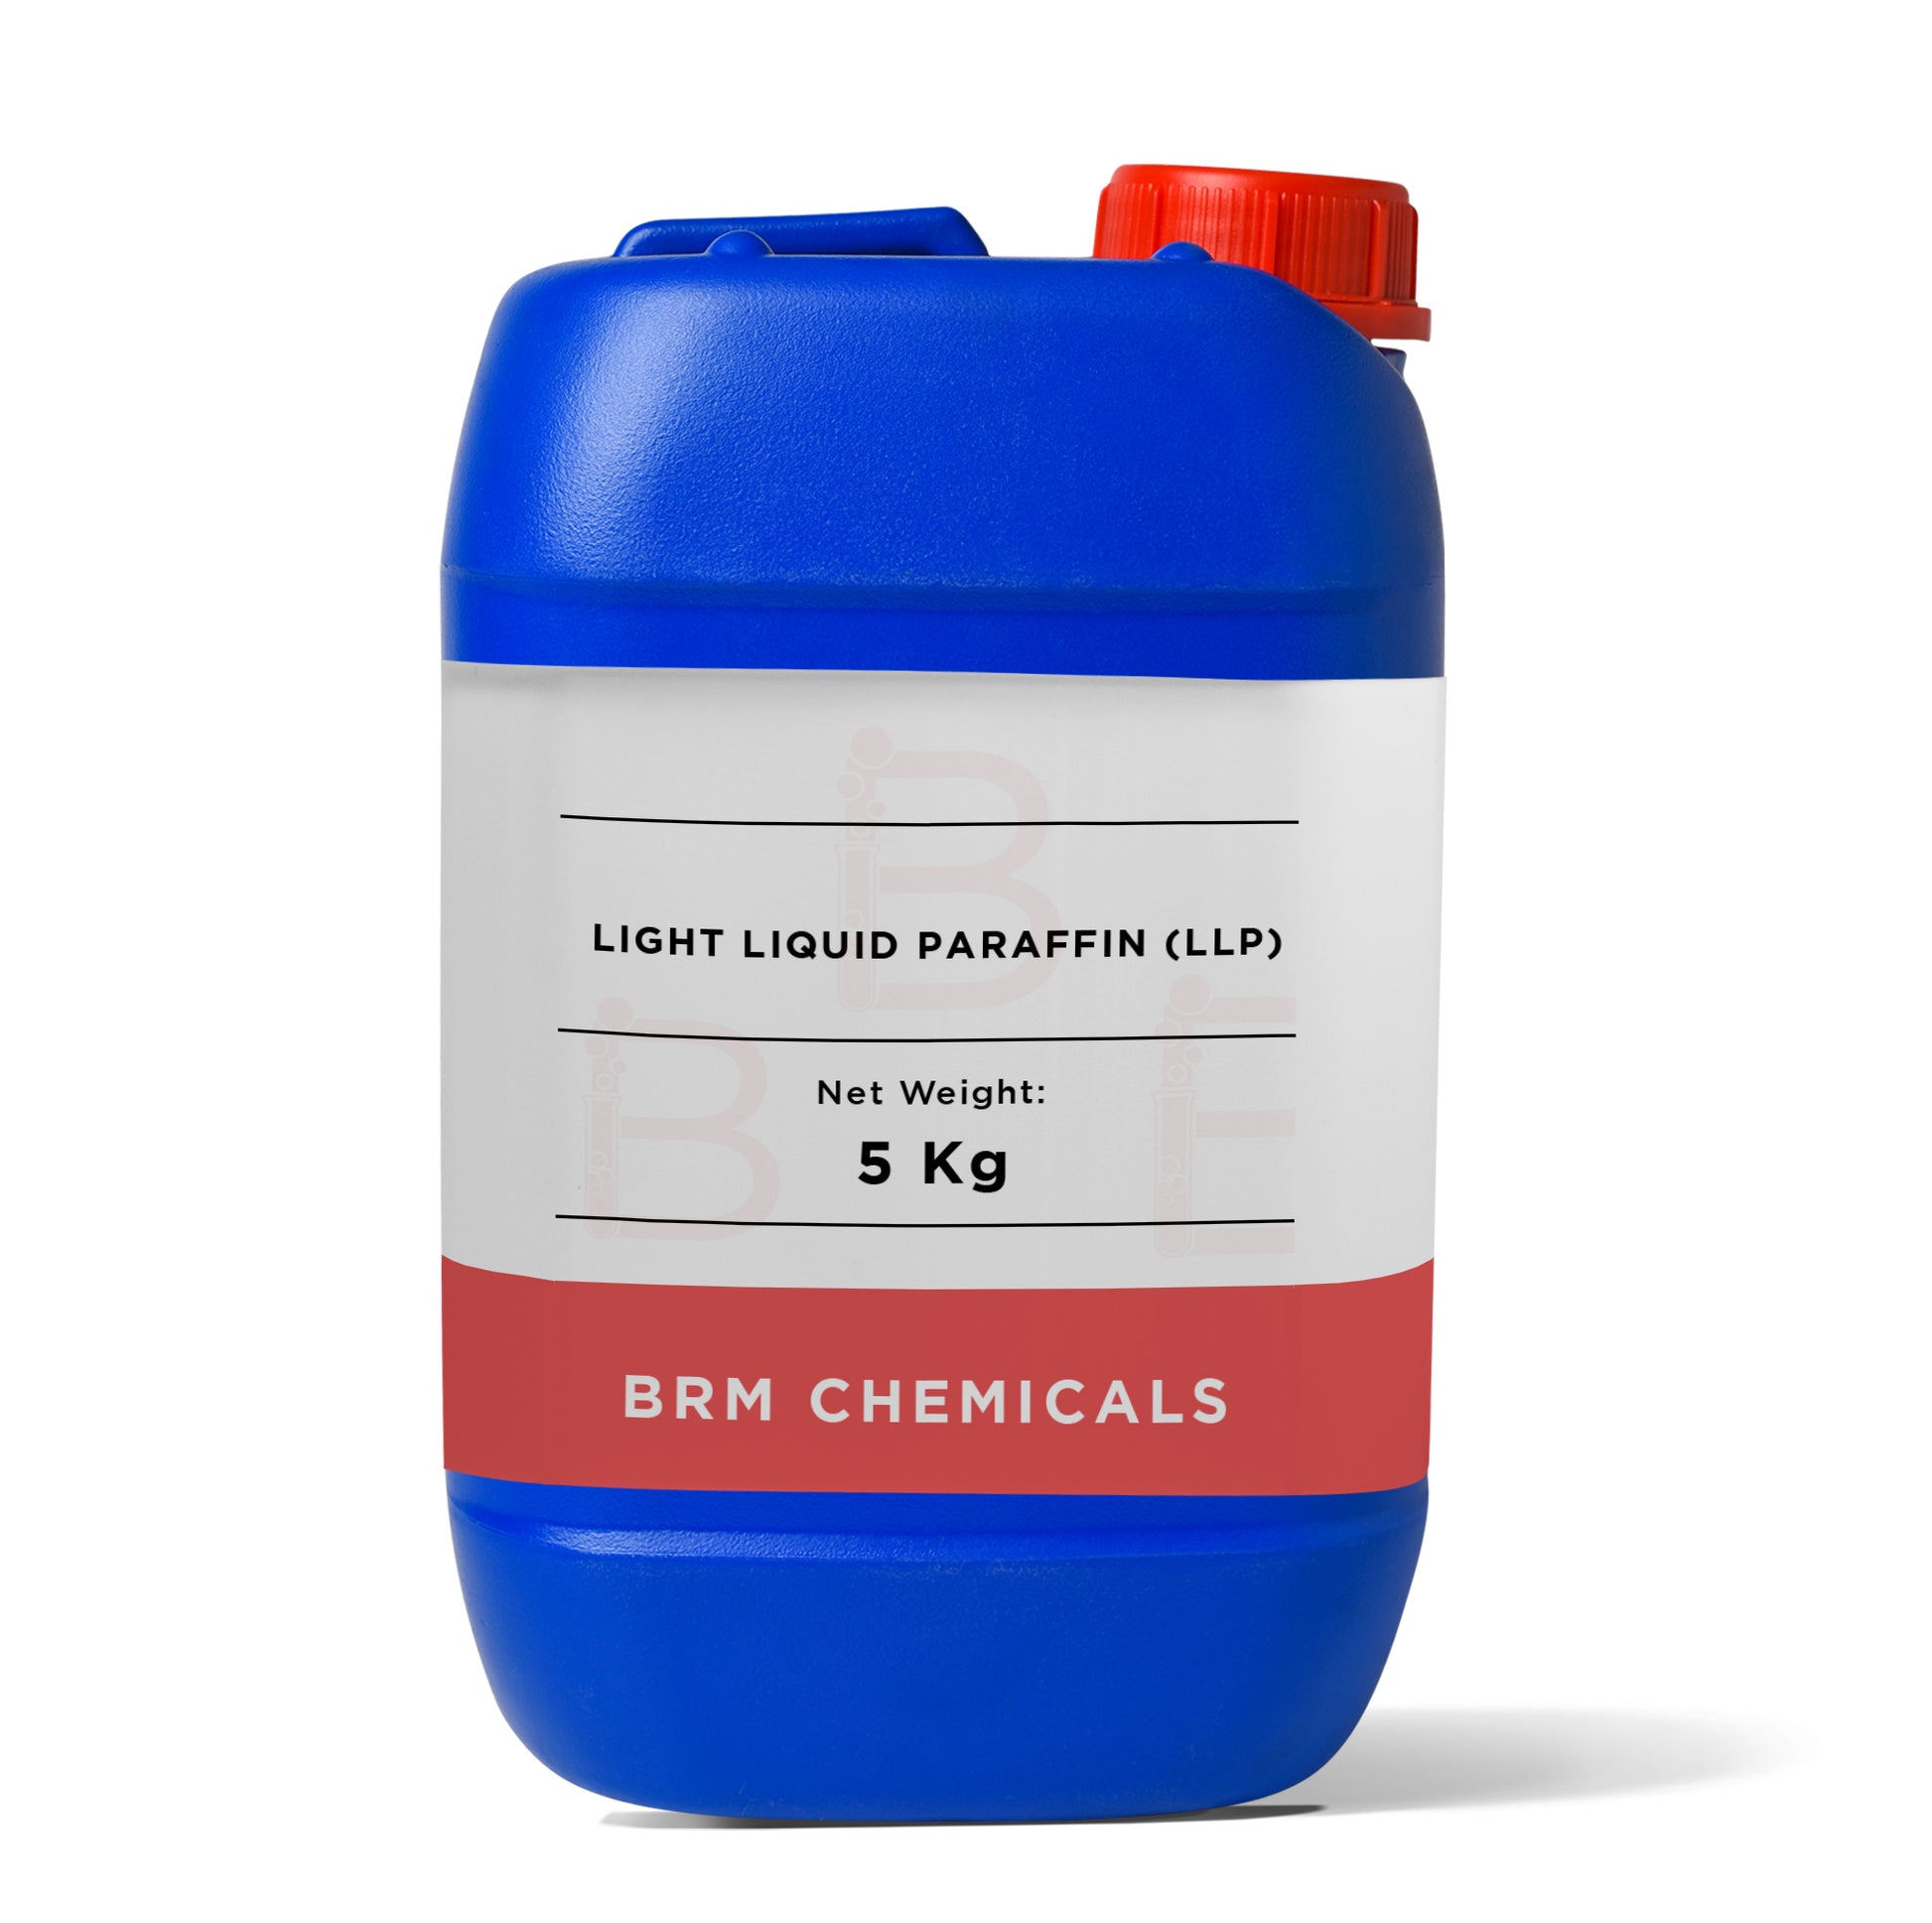 Buy BRM Chemicals Light Liquid Paraffin (LLP) for Soap Making, Shampoo,  Cosmetics, Moisturizer, Lotion Making, DIY Personal Care for Face, Hair,  Skin & Body